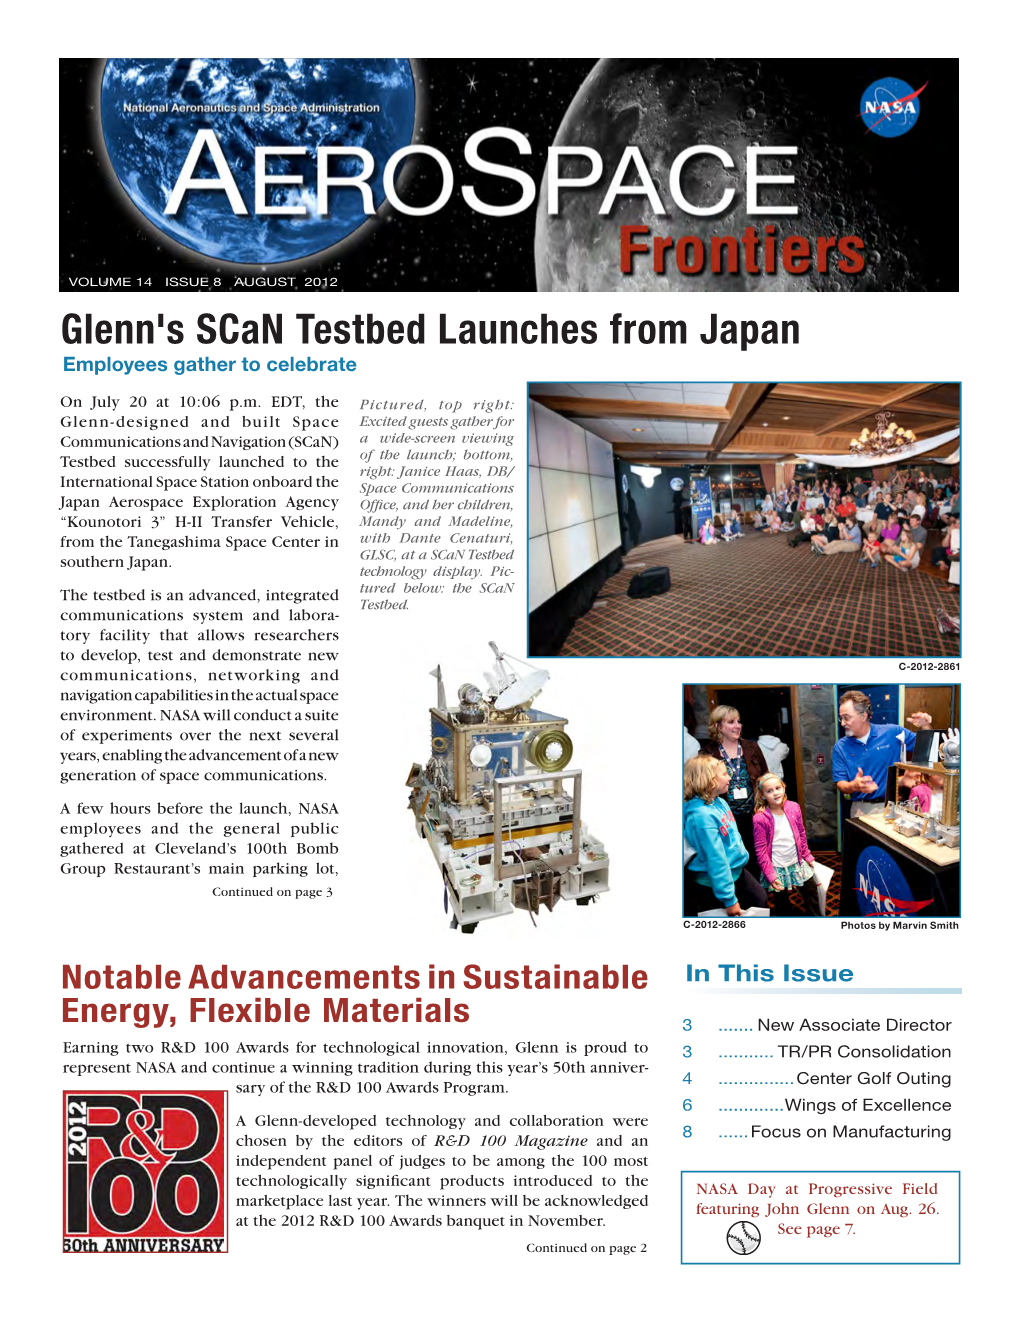 Glenn's Scan Testbed Launches from Japan Employees Gather to Celebrate